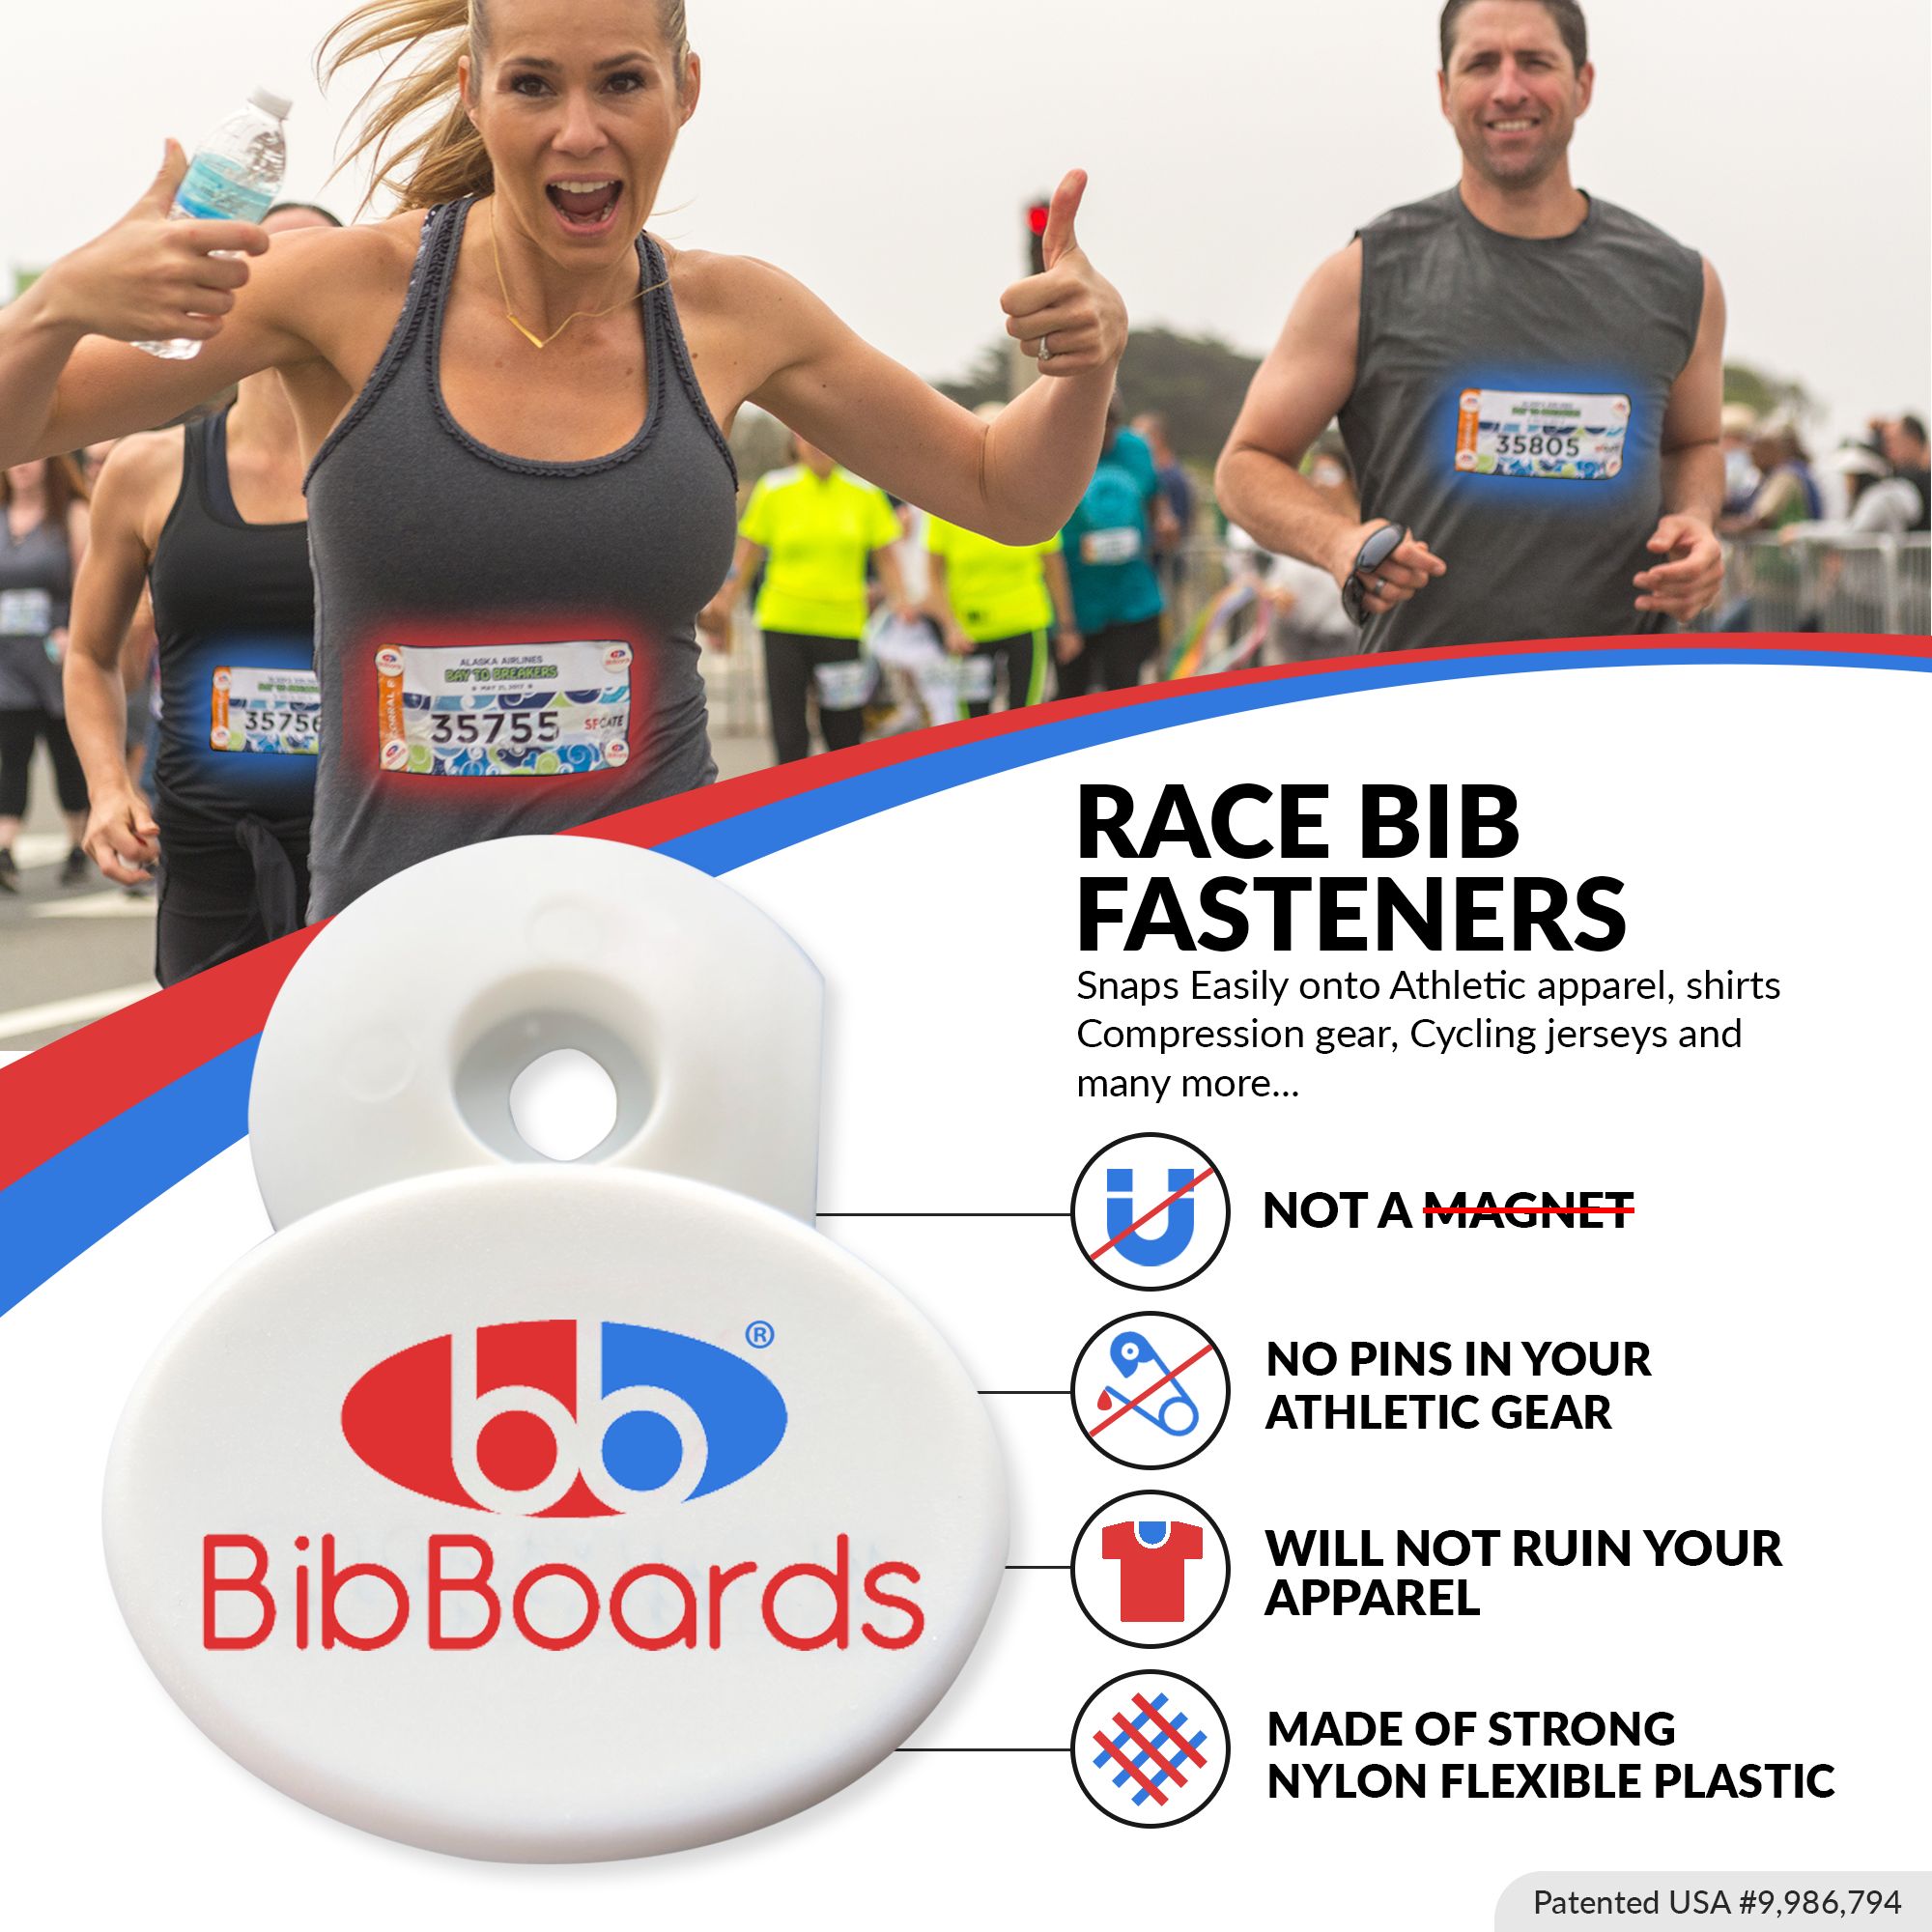 A Business as Secure as Your Bib: BibBoards Celebrates 5 Years